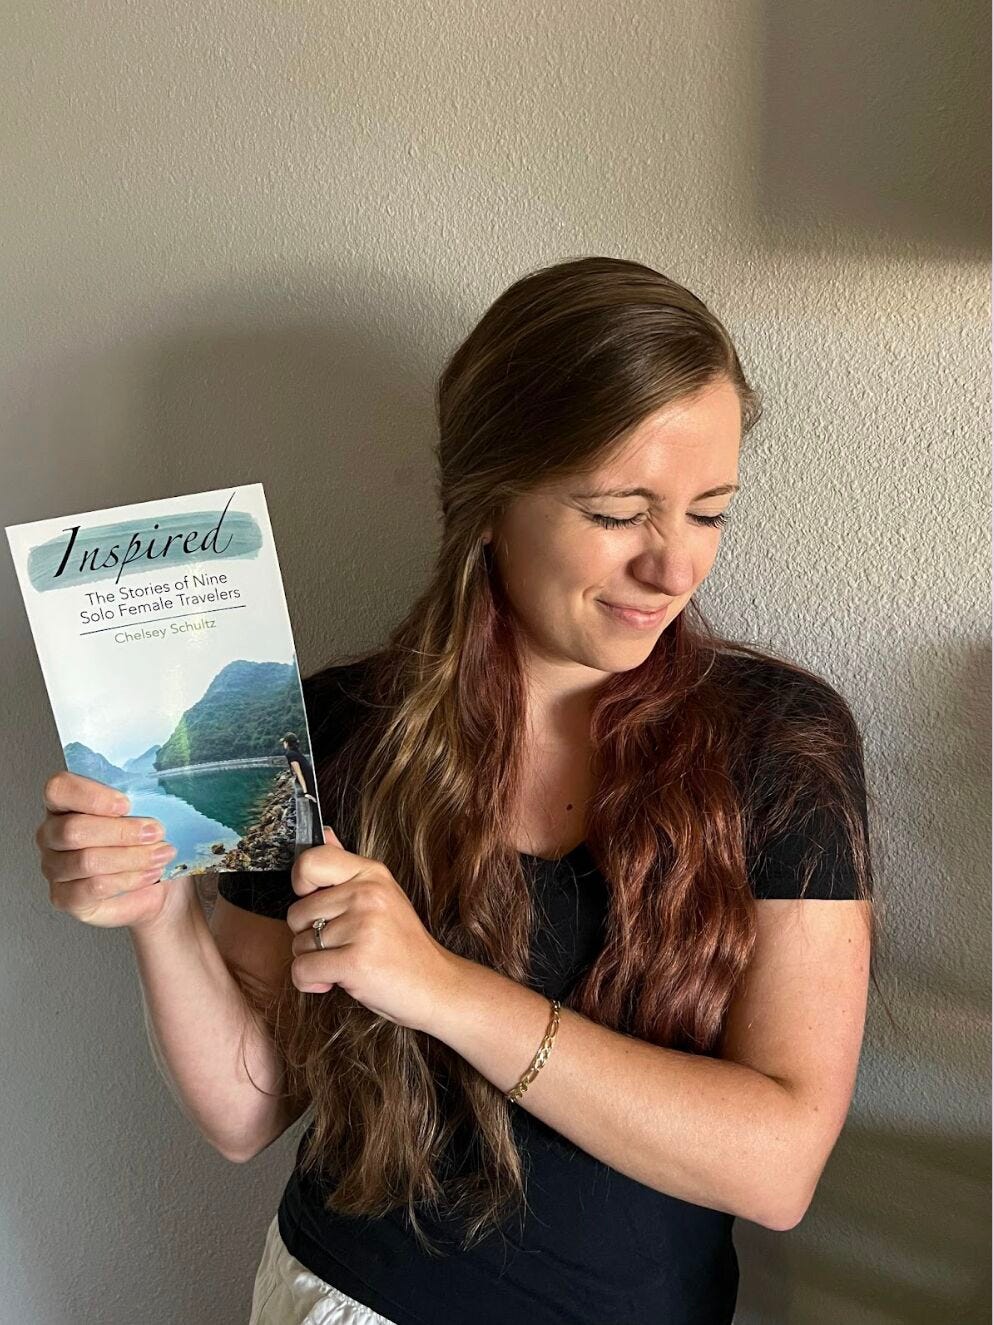 A photo of Chelsey holding the book Inspired: The Stories of Nine Solo Female Travelers.